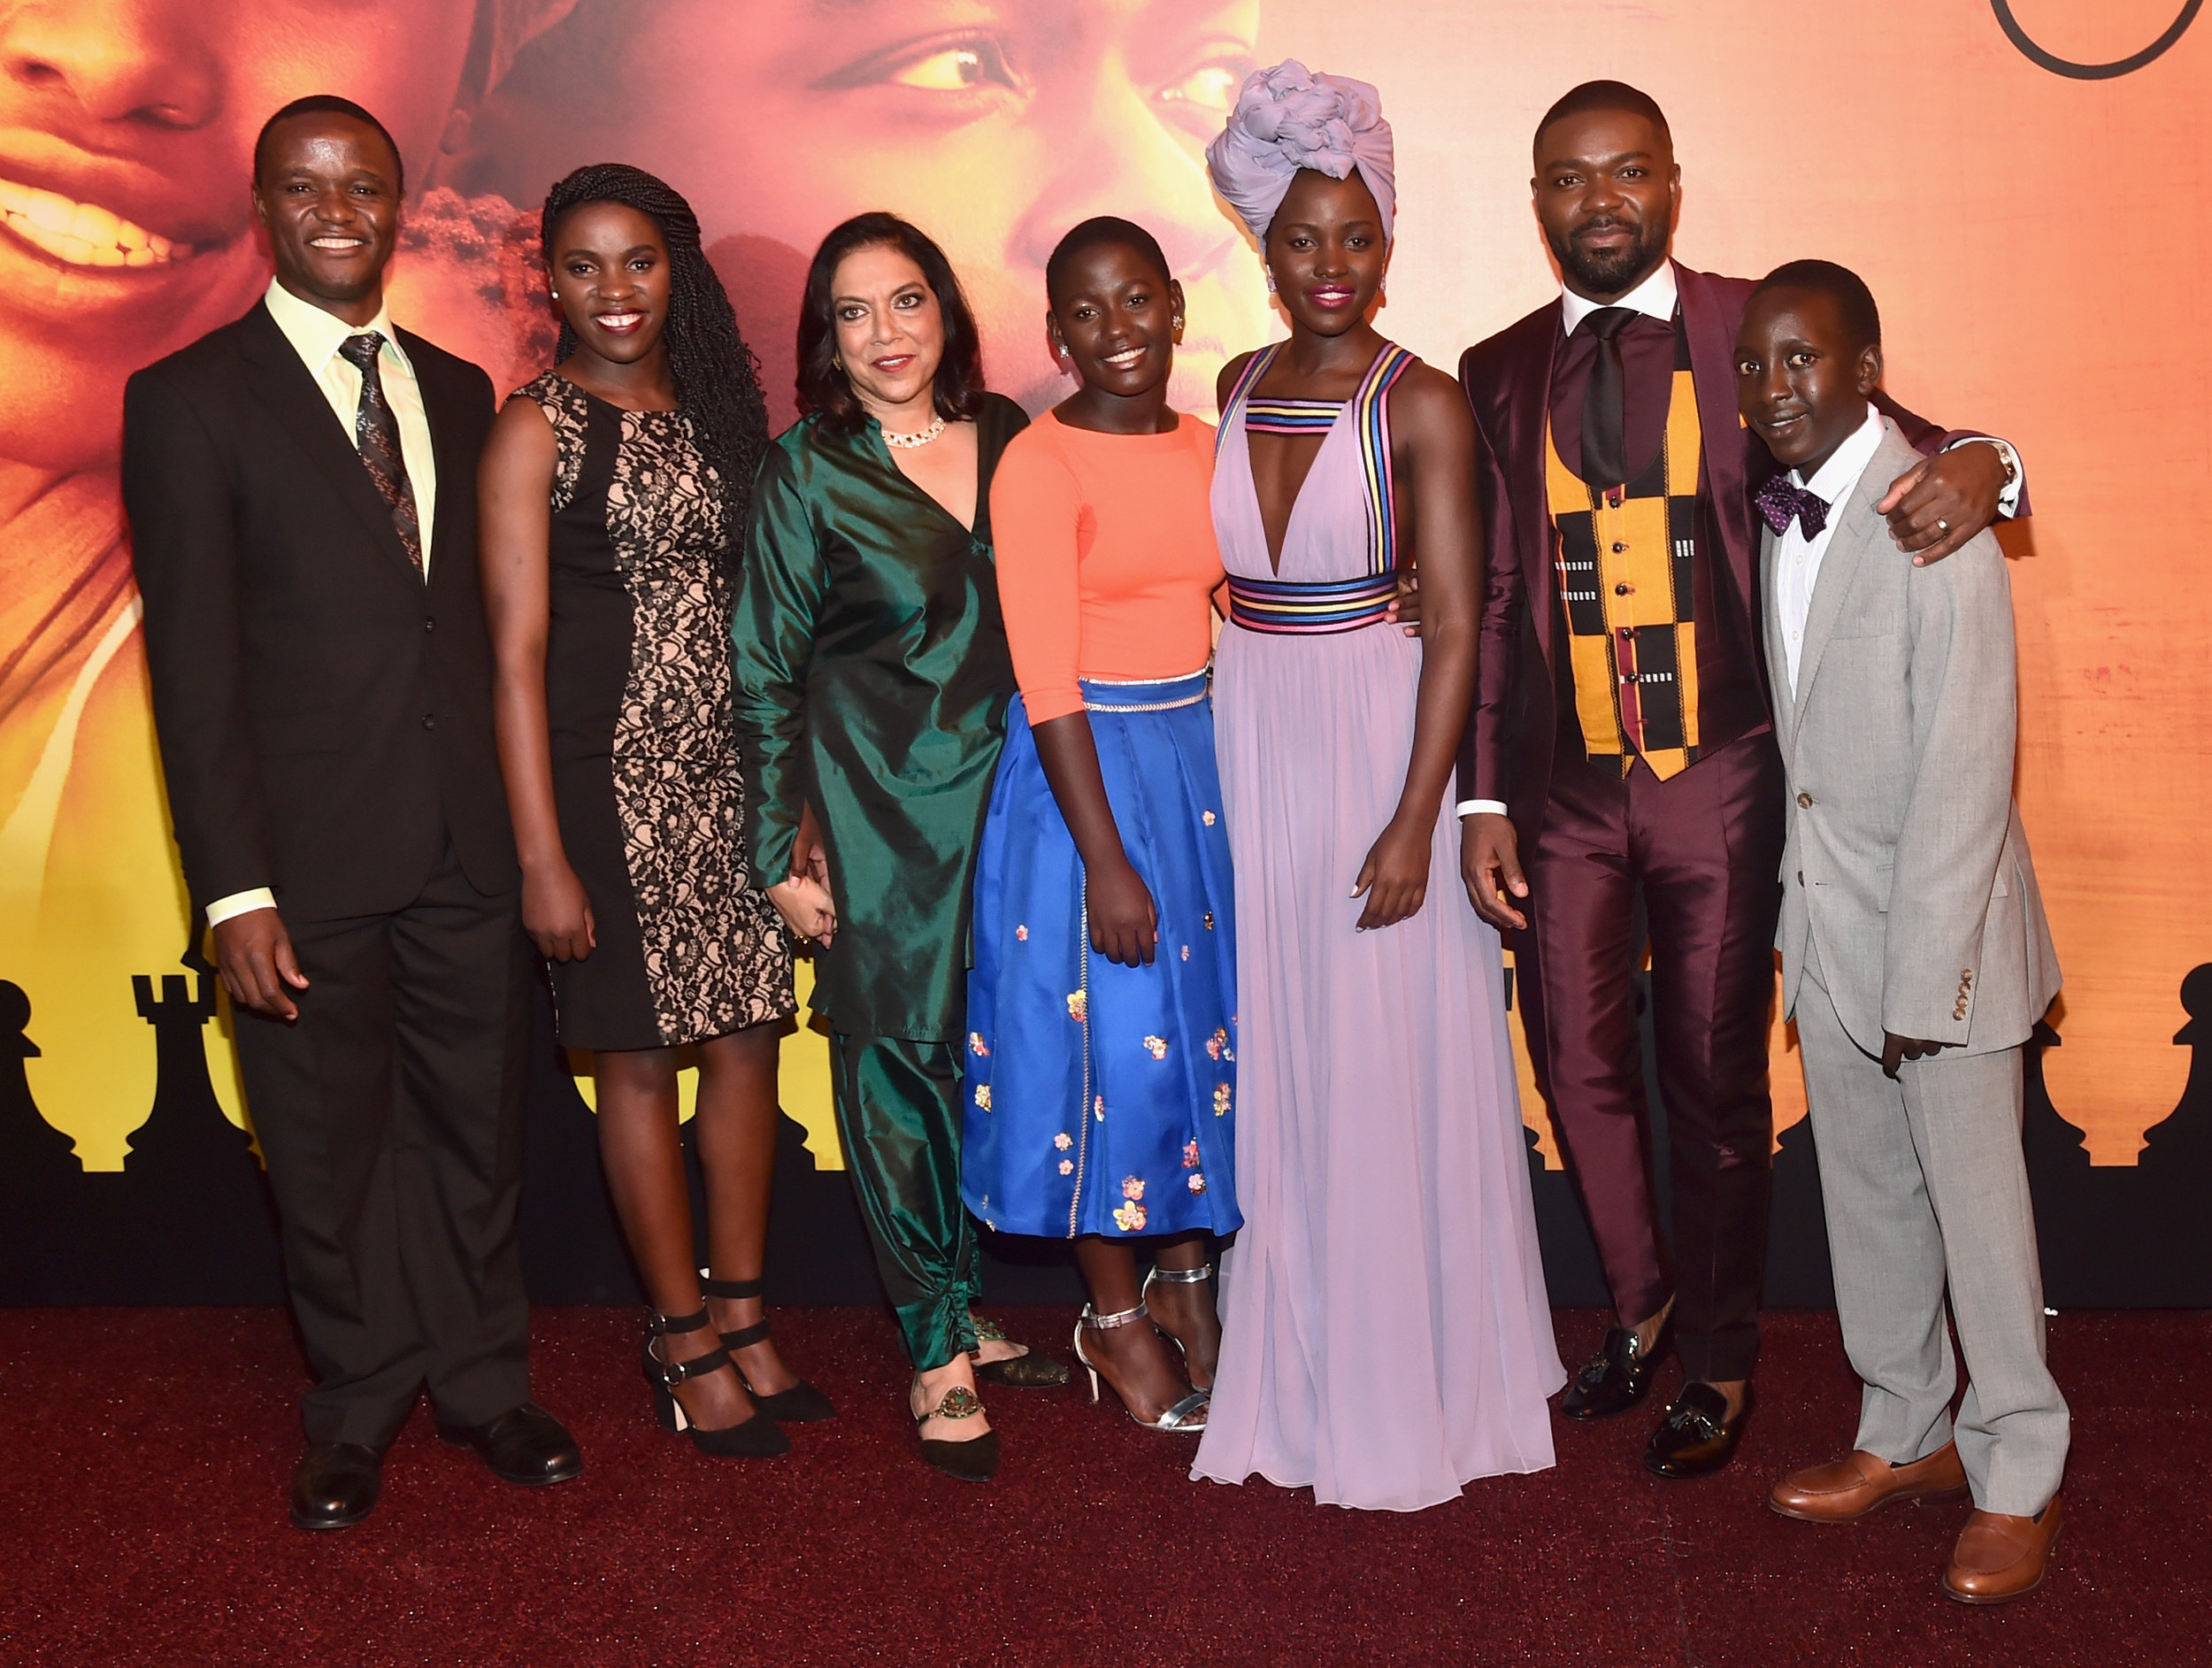 Hollywood Premiere of Queen of Katwe (Photo by Alberto E. Rodriguez/Getty Images for Disney)